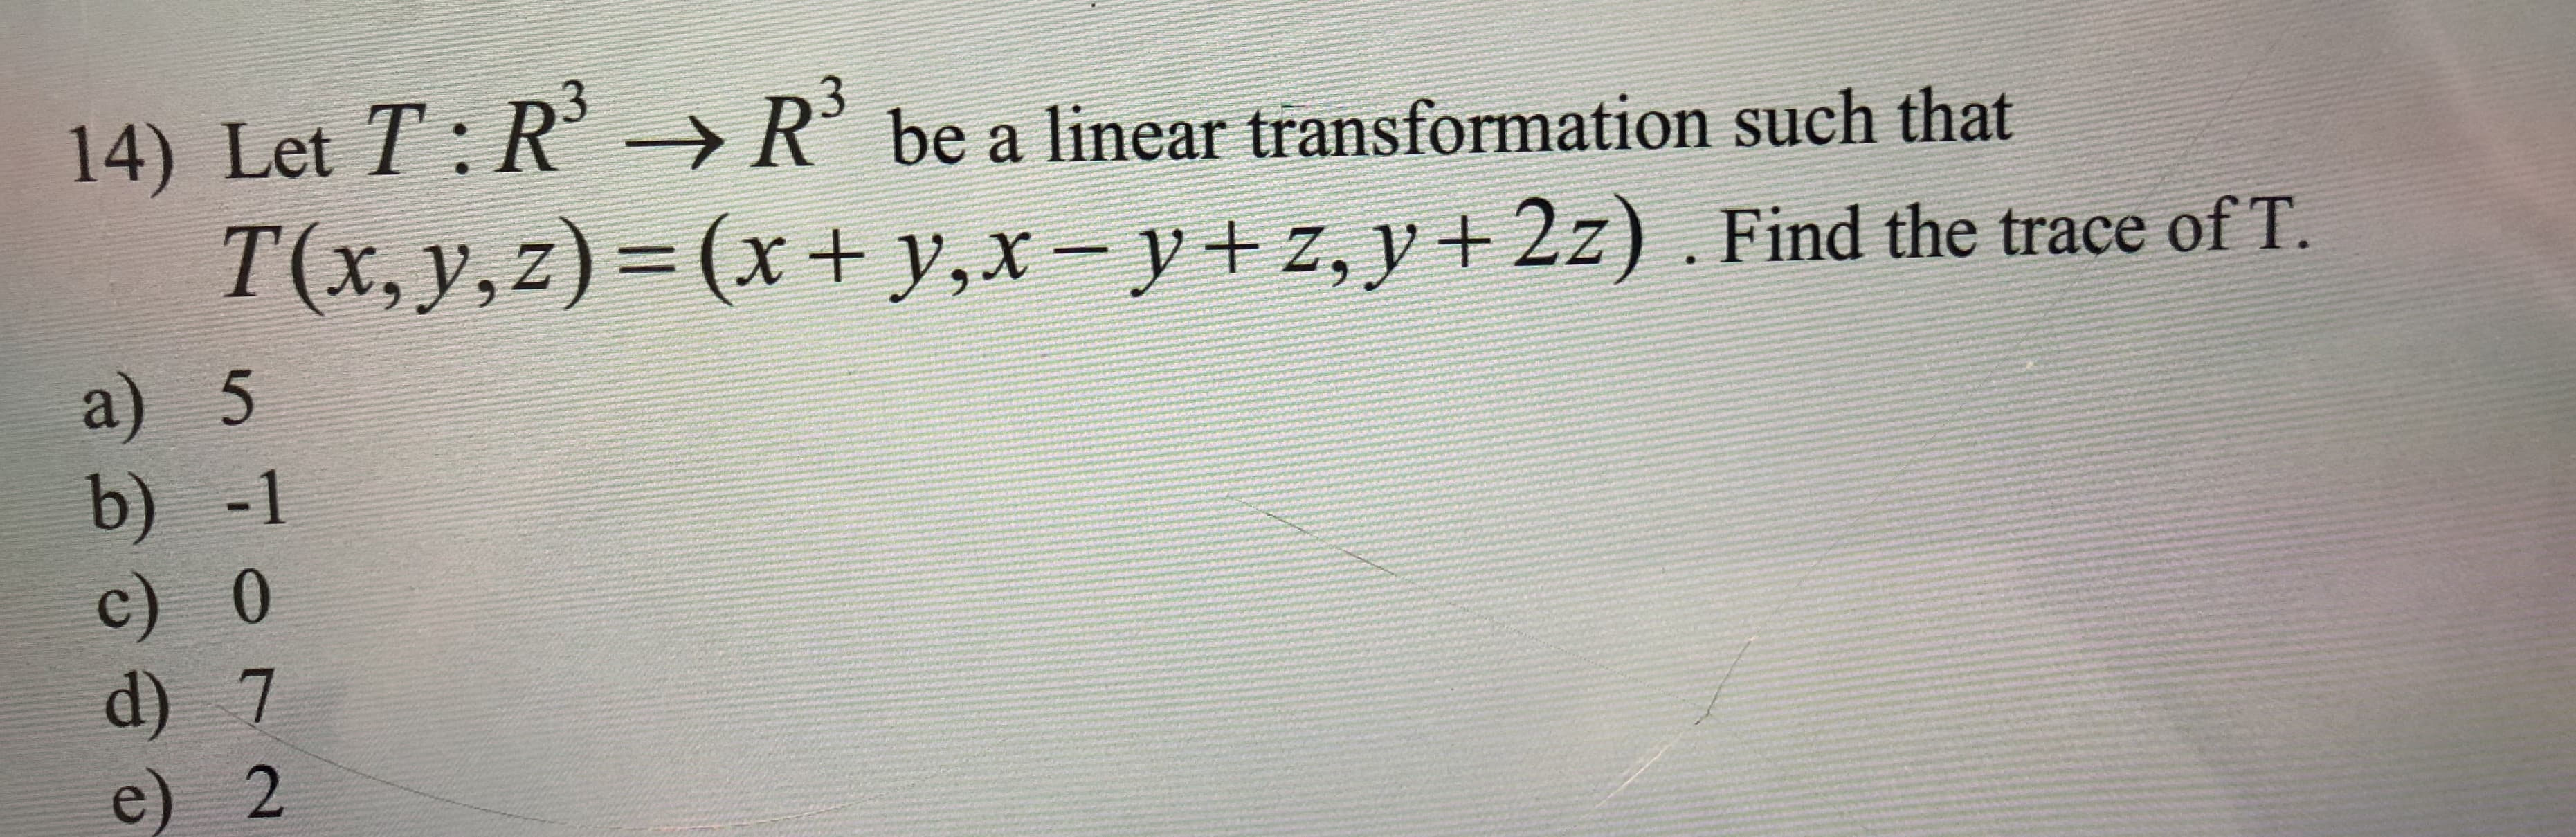 14) Let T: R
be a linear transformation such that
R
T(x, y,z)= (x + y,x-
y+z, y2z) . Find the trace of T.
a) 5
b) -1
c) 0
d) 7
e) 2
